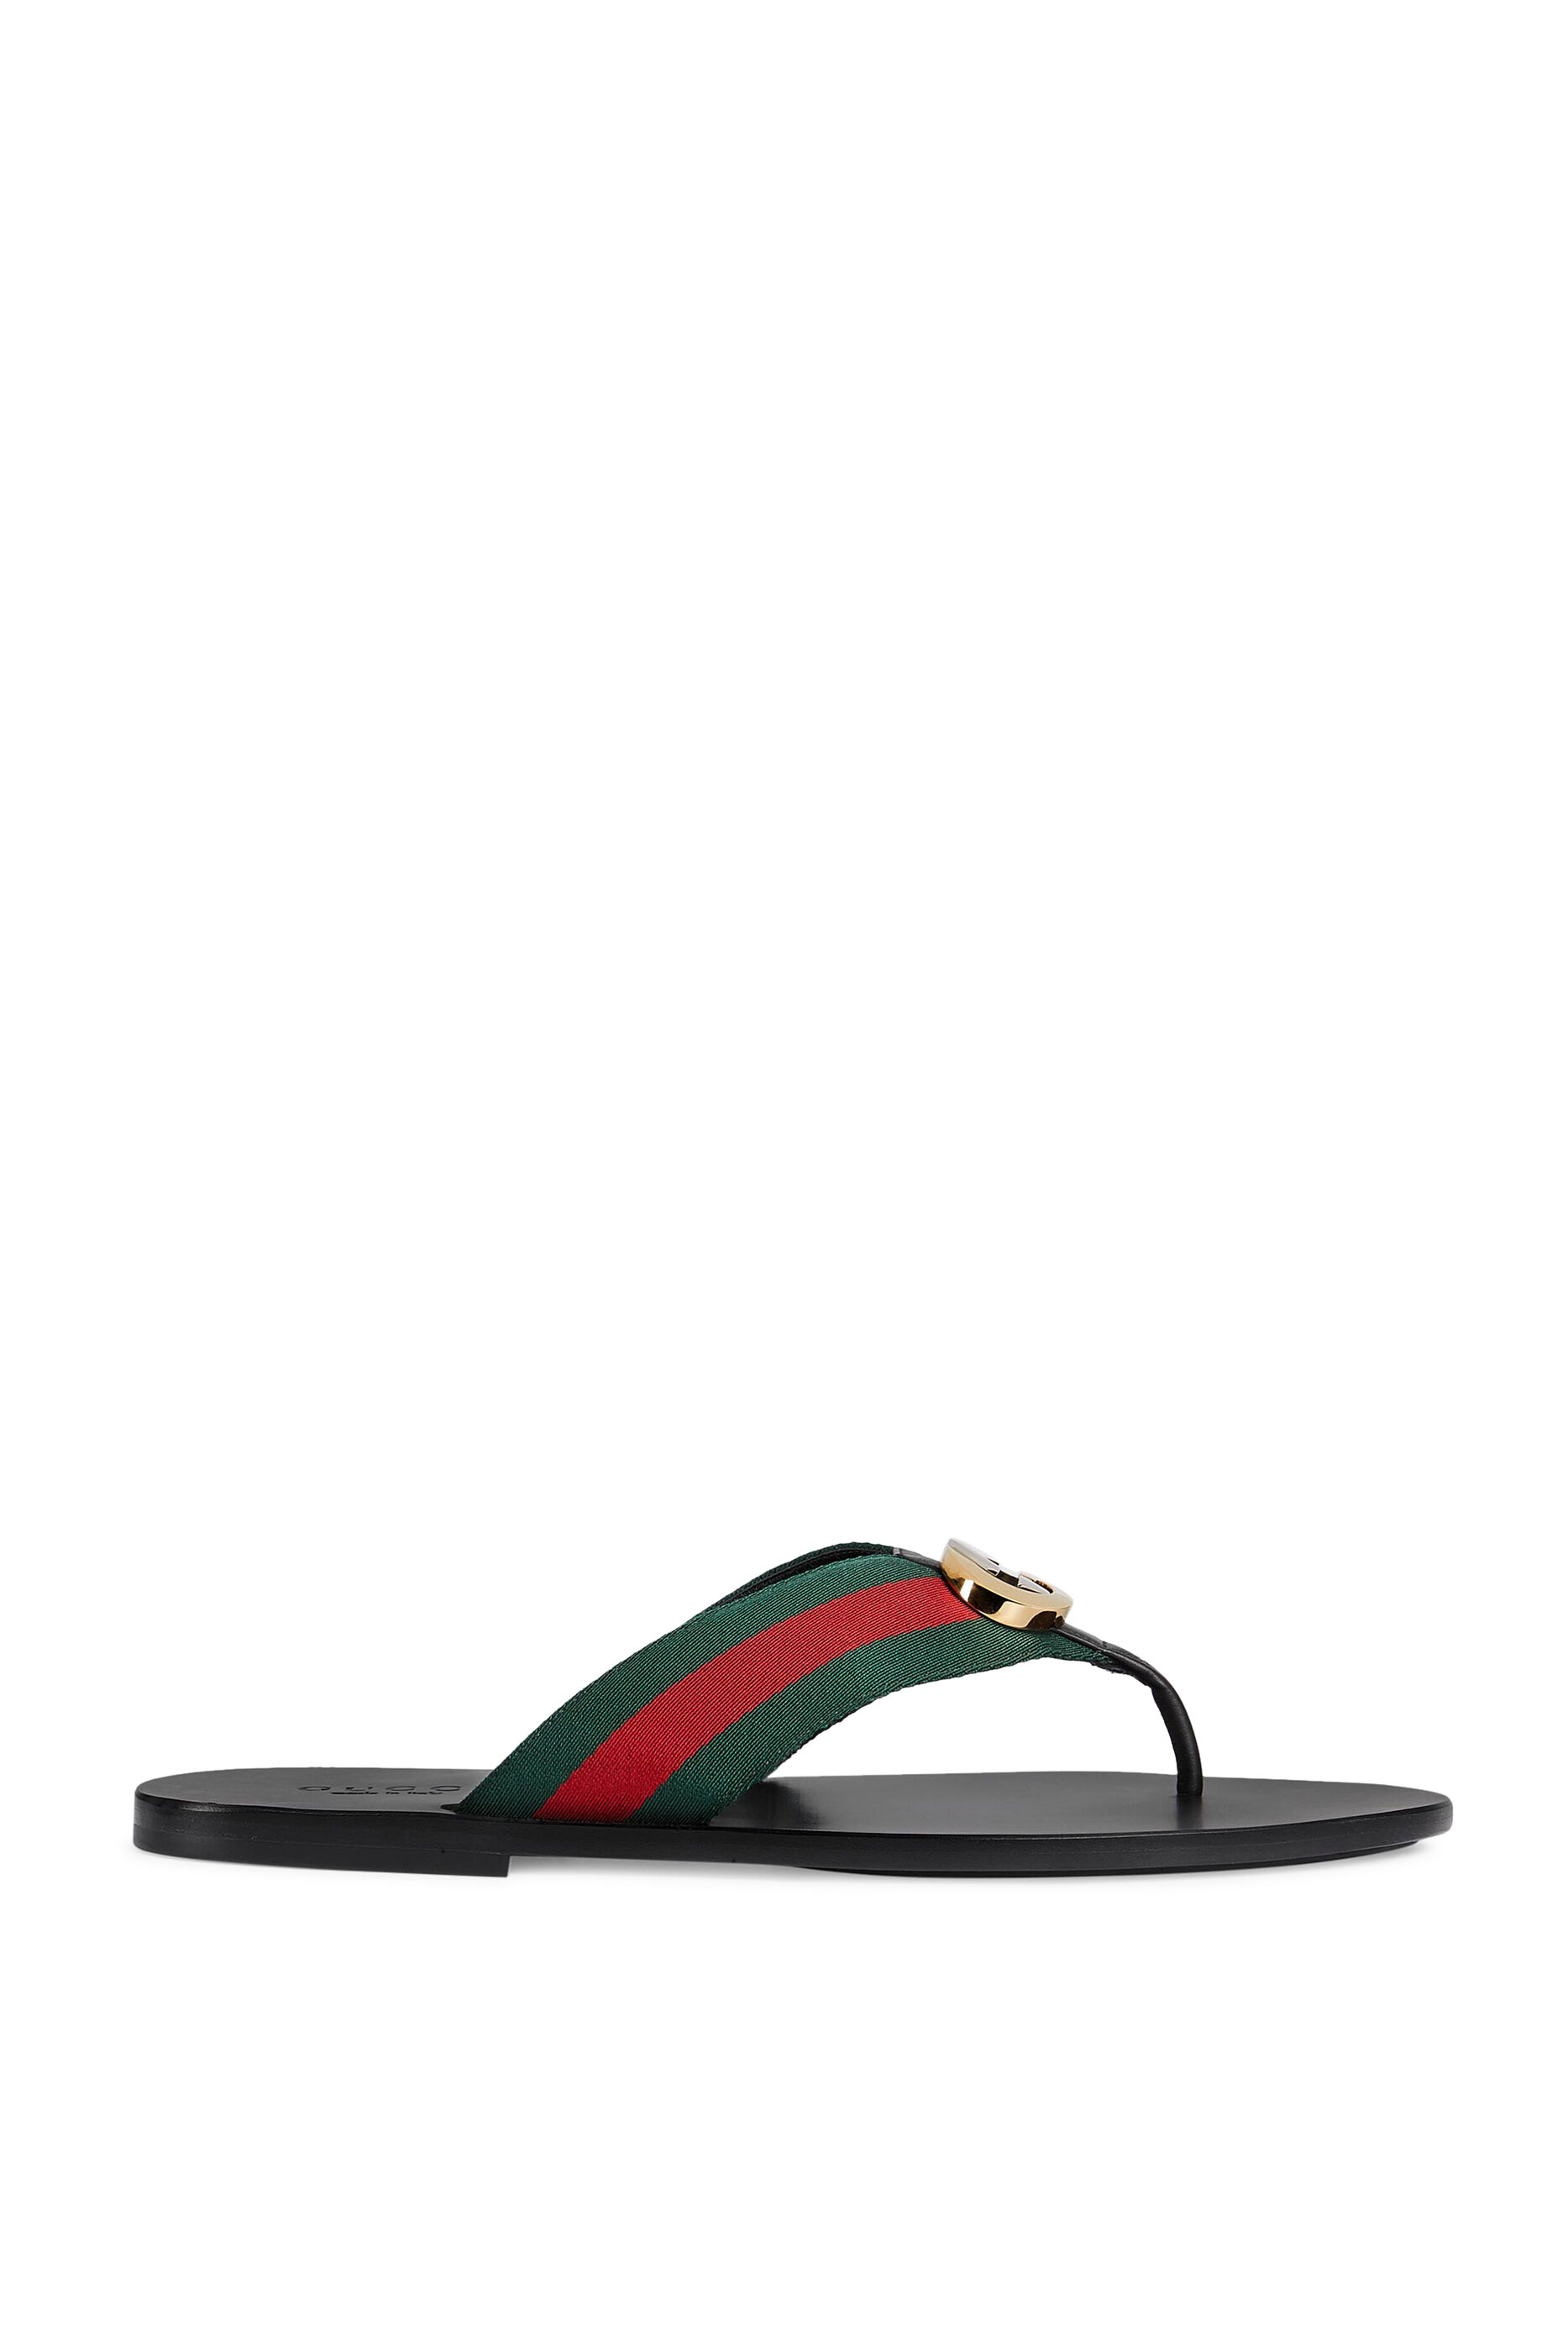 gucci thong sandals for cheap